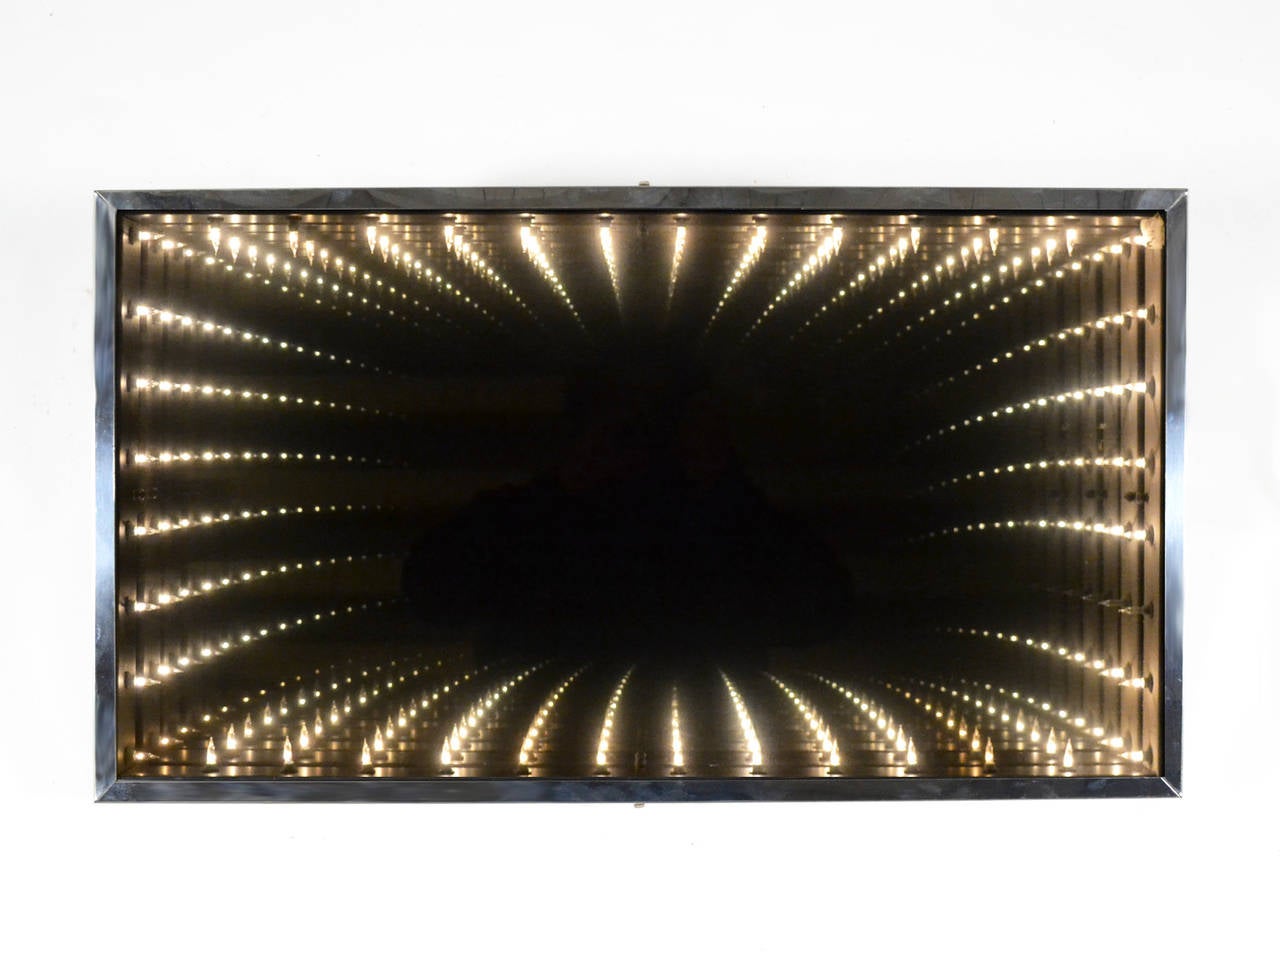 This compelling piece is both mirror and artwork. A two-way mirror set in a deep frame in front of a surround of tiny lights which, when illuminated, create the illusion of great depth.